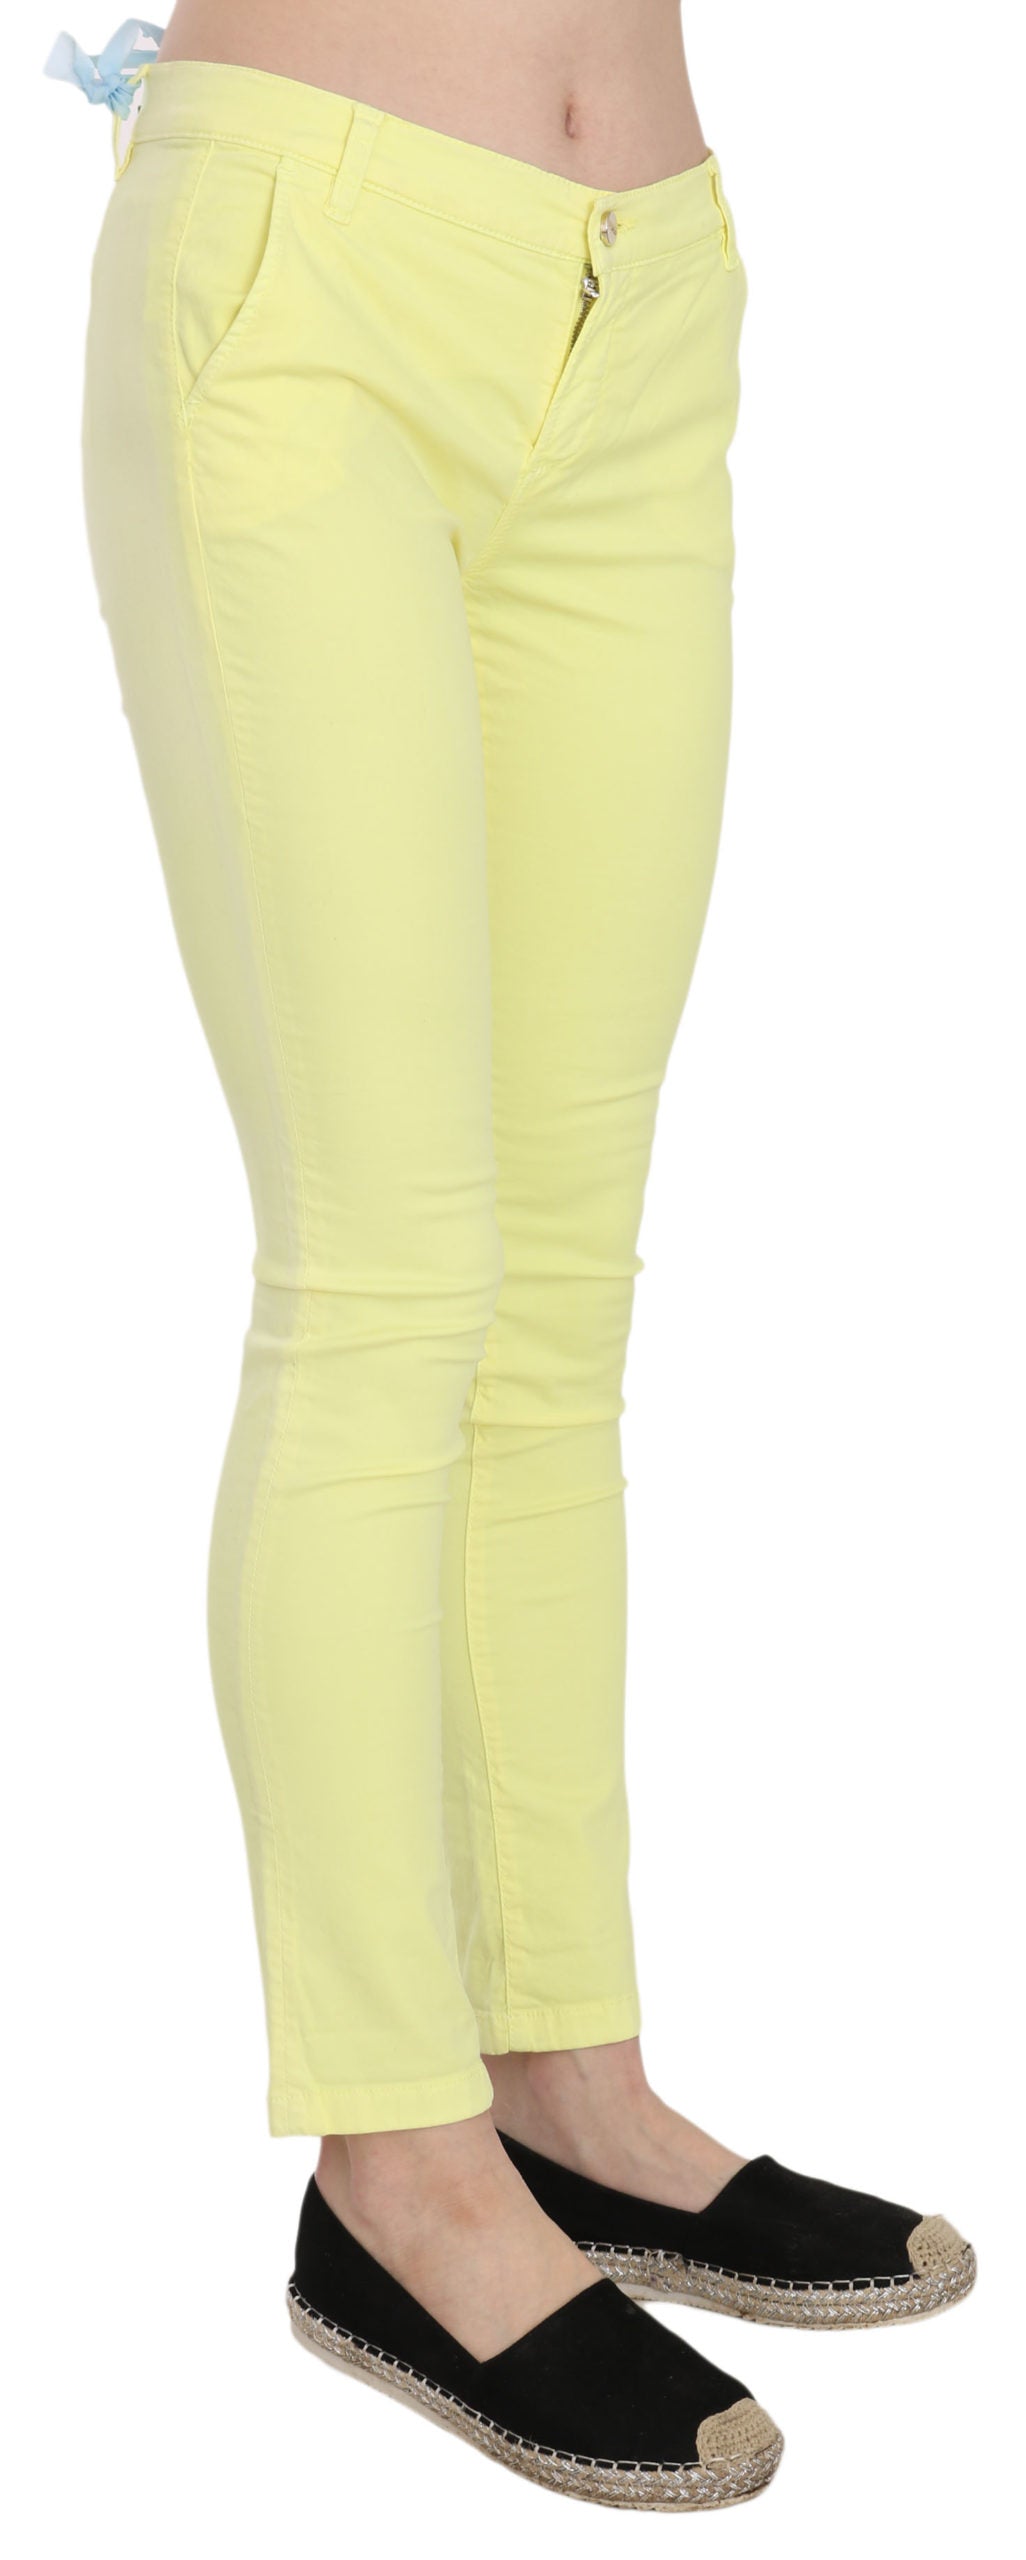 Chic Yellow Low Waist Skinny Casual Trousers